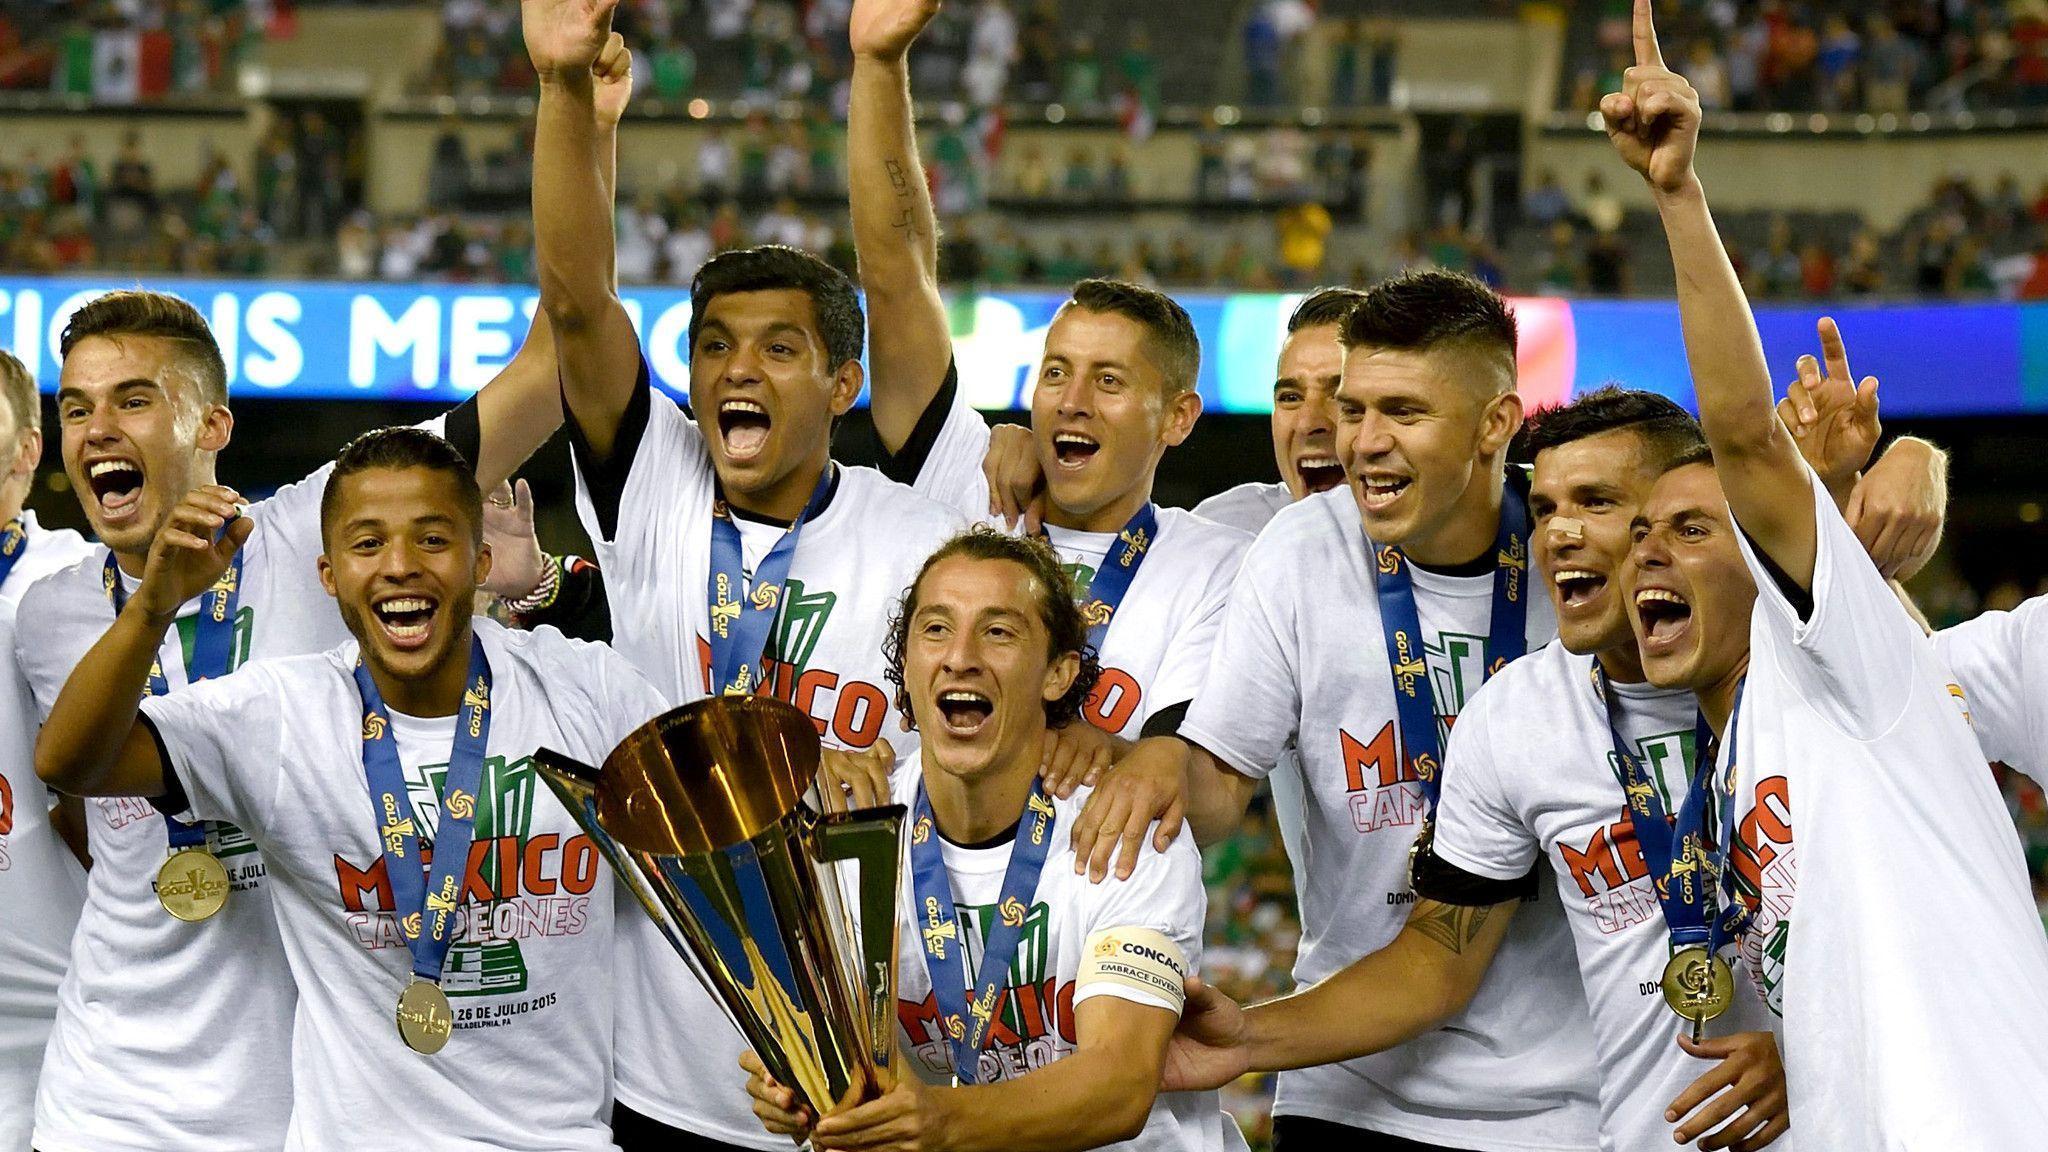 U.S.-Mexico soccer playoff to be held at Rose Bowl